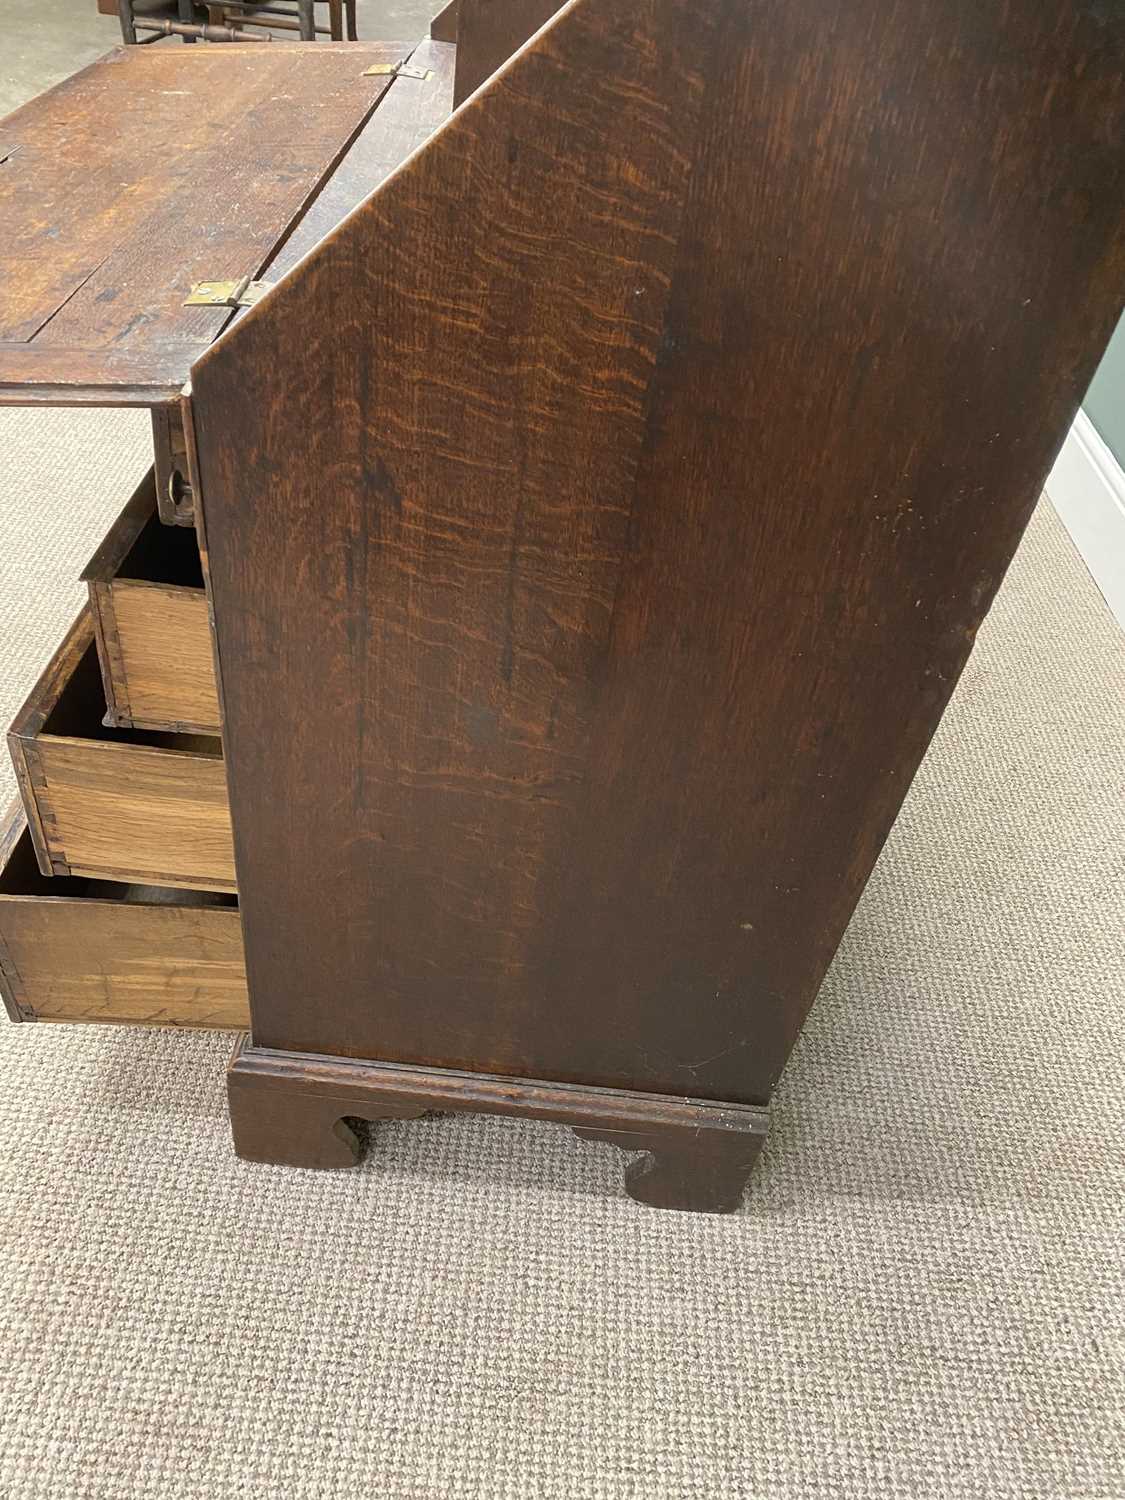 GEORGIAN OAK FALL FRONT BUREAU, the cleated end fall opening to reveal a fitted interior of - Image 6 of 6